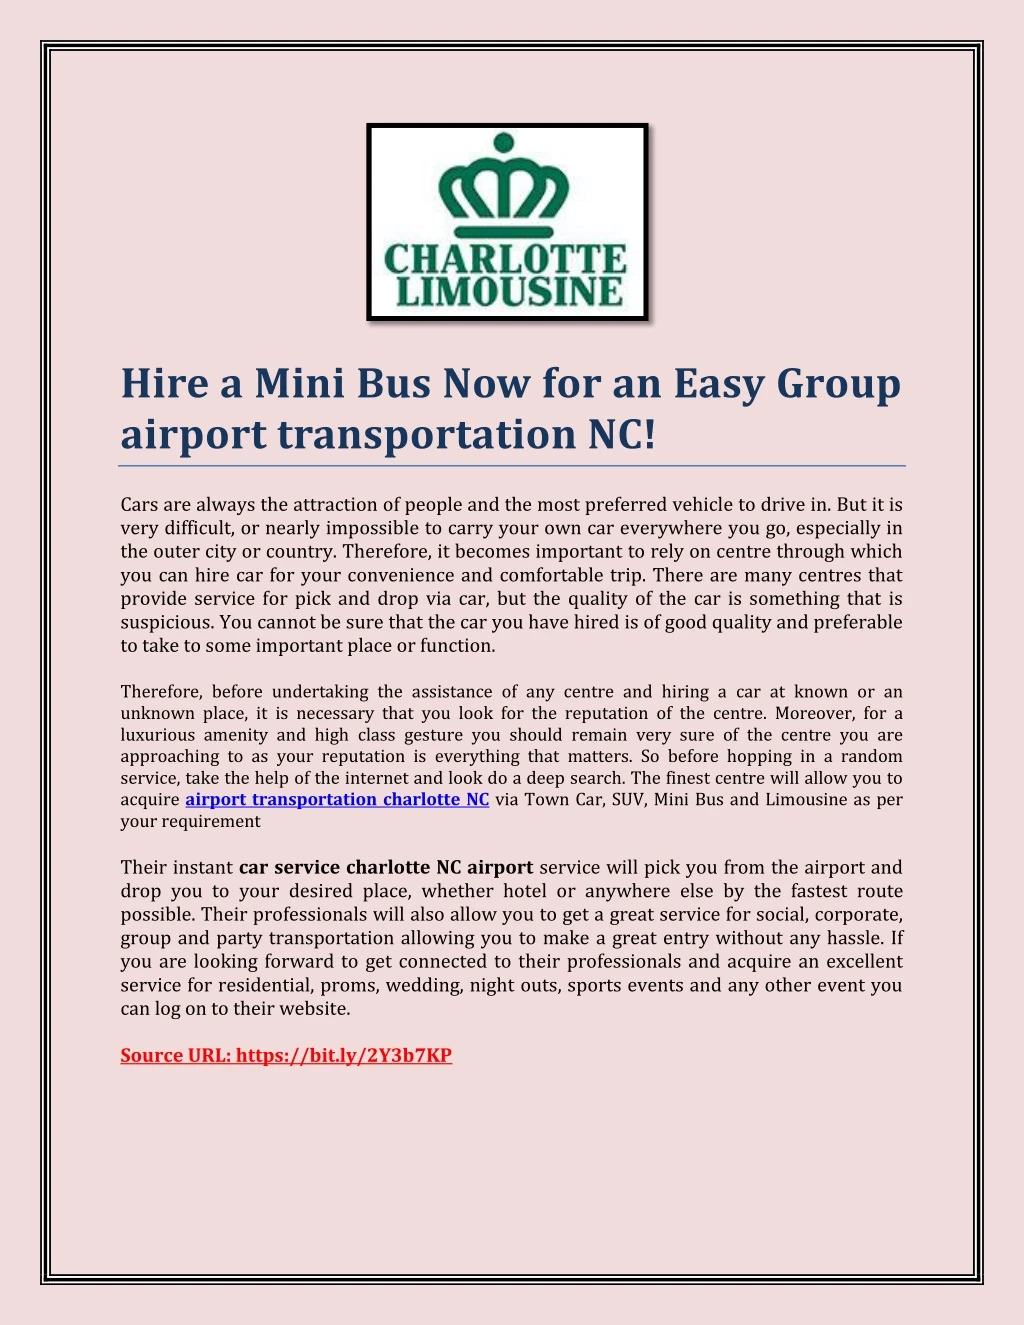 hire a mini bus now for an easy group airport